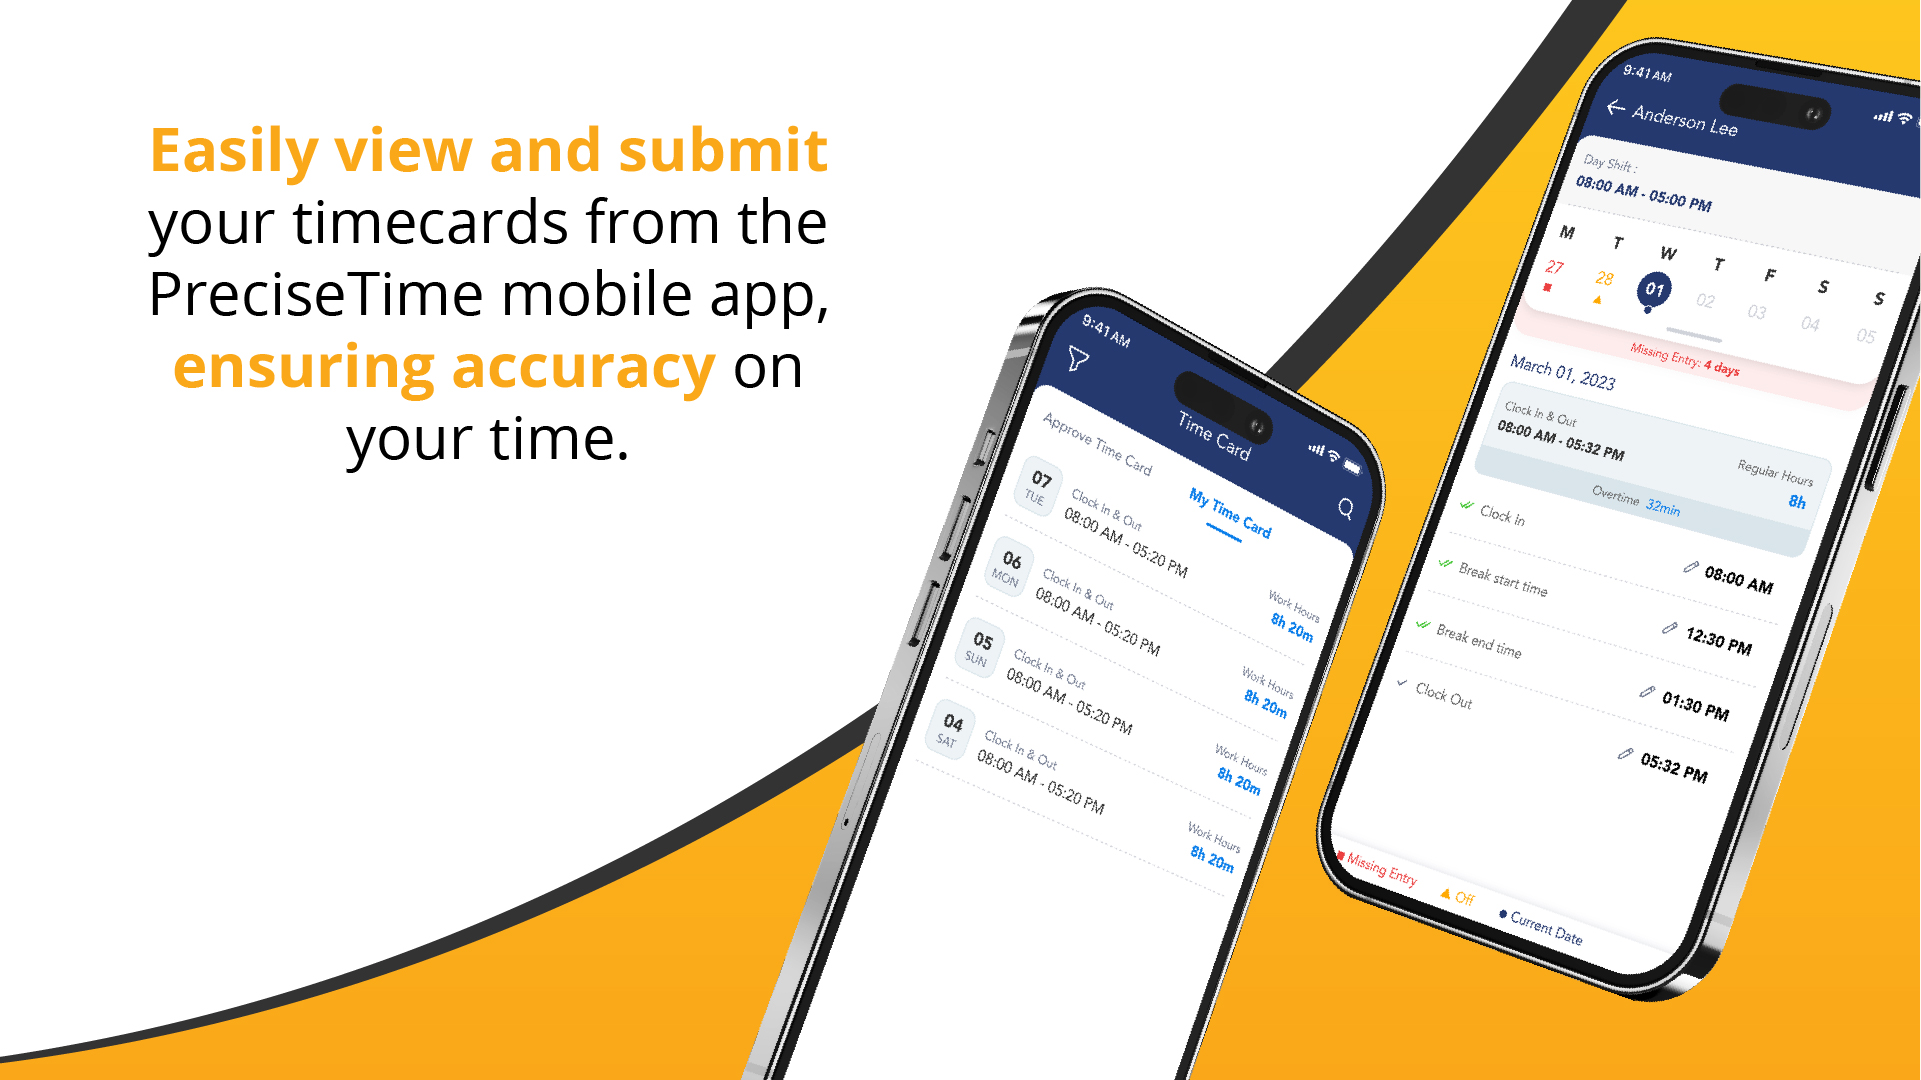 Easily view and submit your timecards from the PreciseTime mobile app, ensuring accuracy on your time